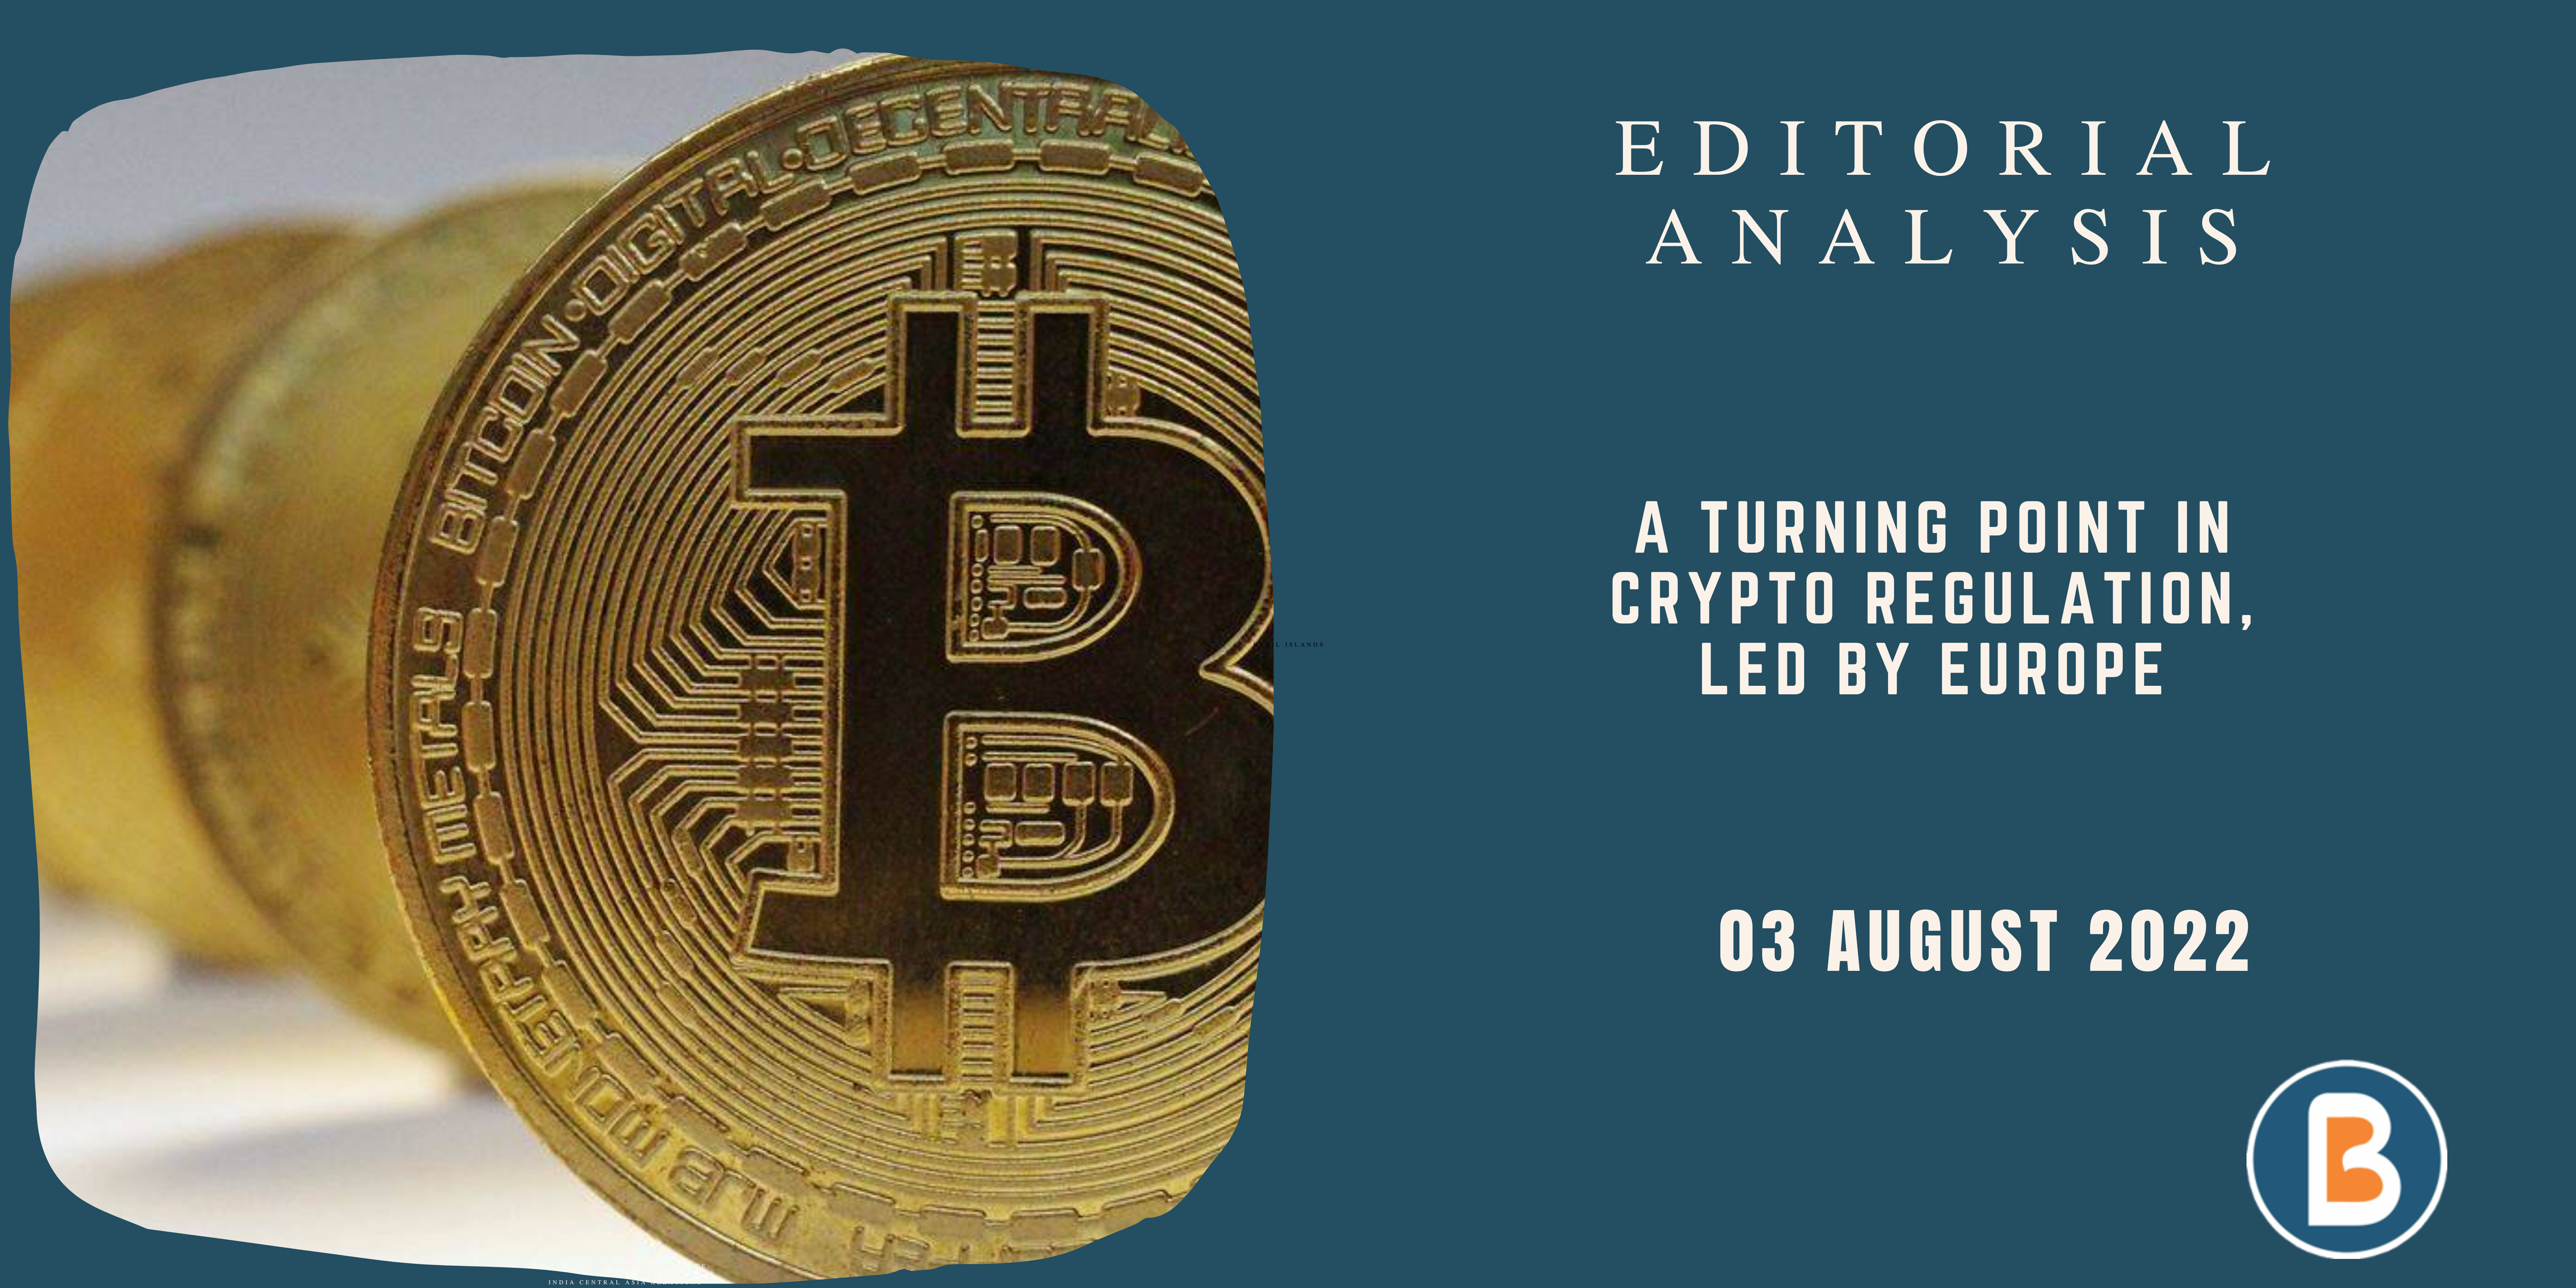 IAS EDITORIAL ANALYSIS - A Turning Point in Crypto Regulation, led by Europe